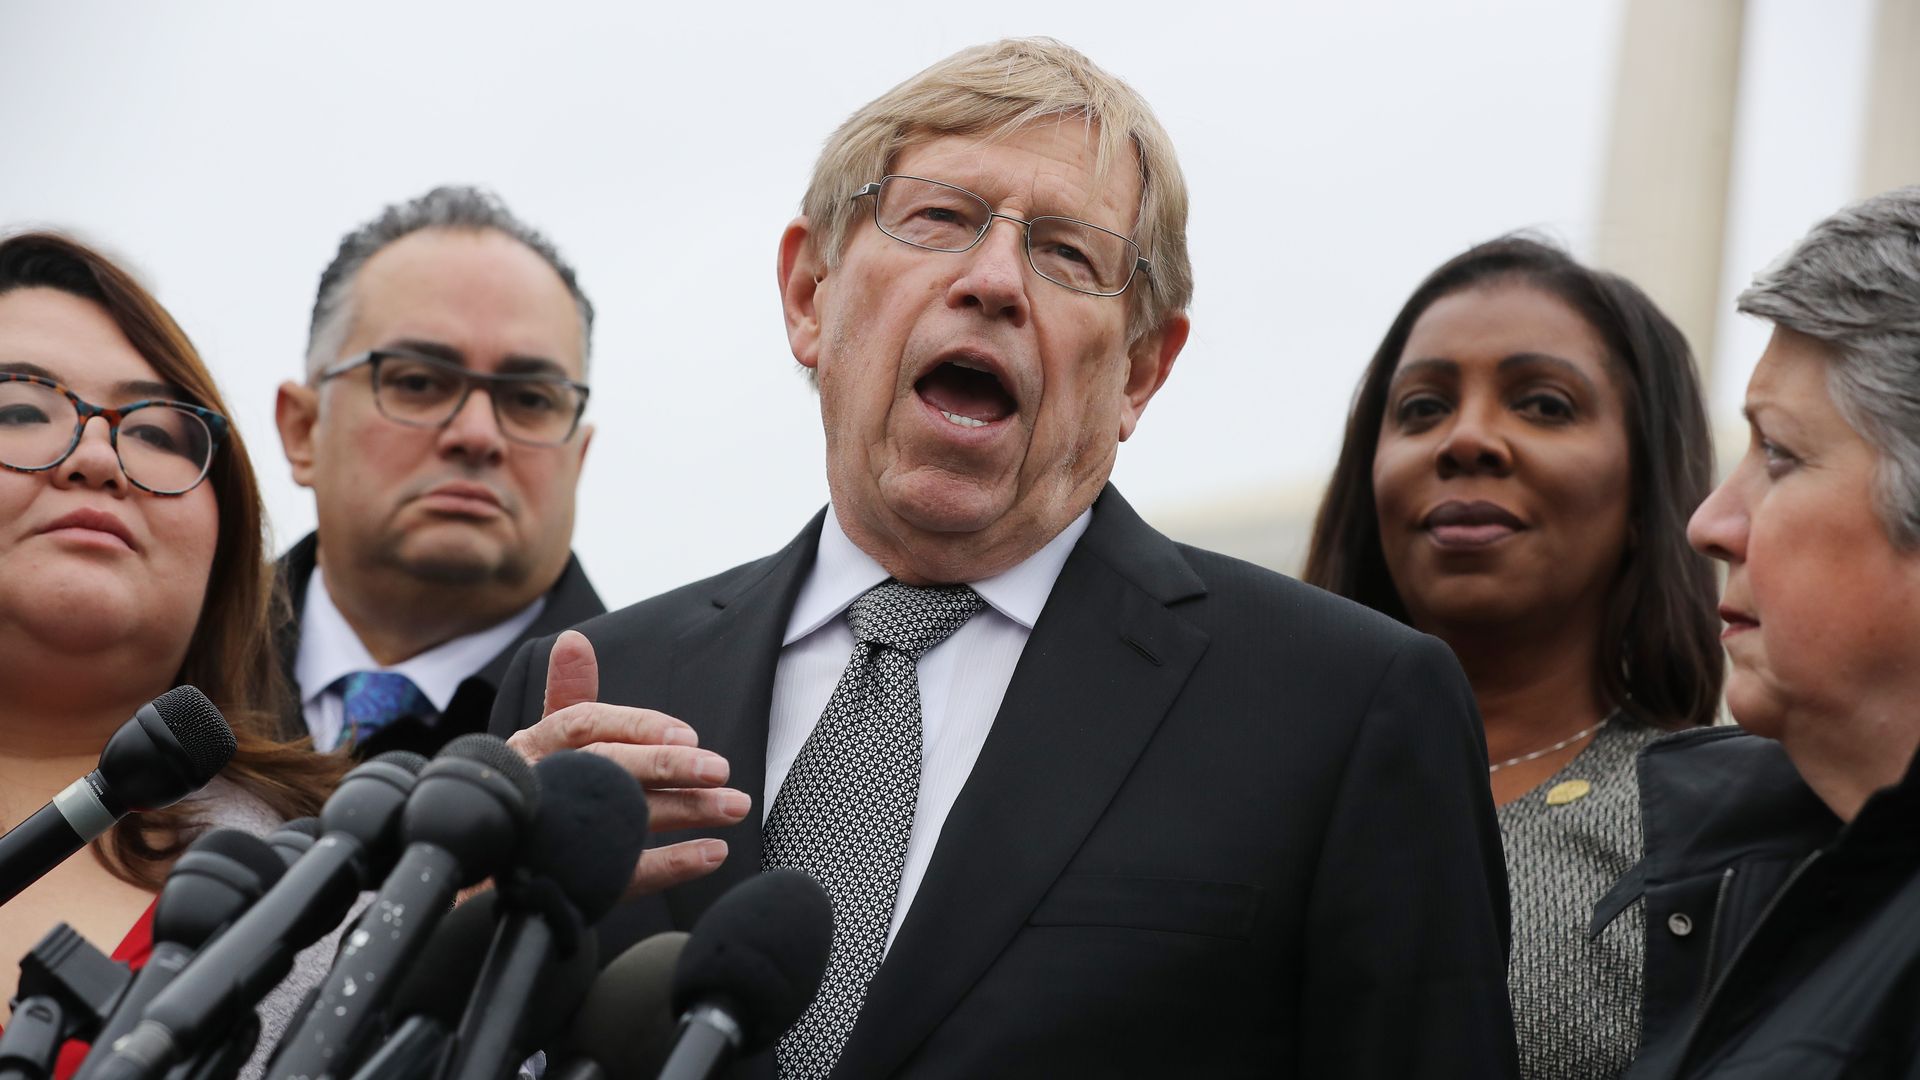 Lawyer Ted Olson (C) talks to reporters with New York State Attorney General Letitia James (2nd R) and former Homeland Security Secretary Janet Napolitano (R).